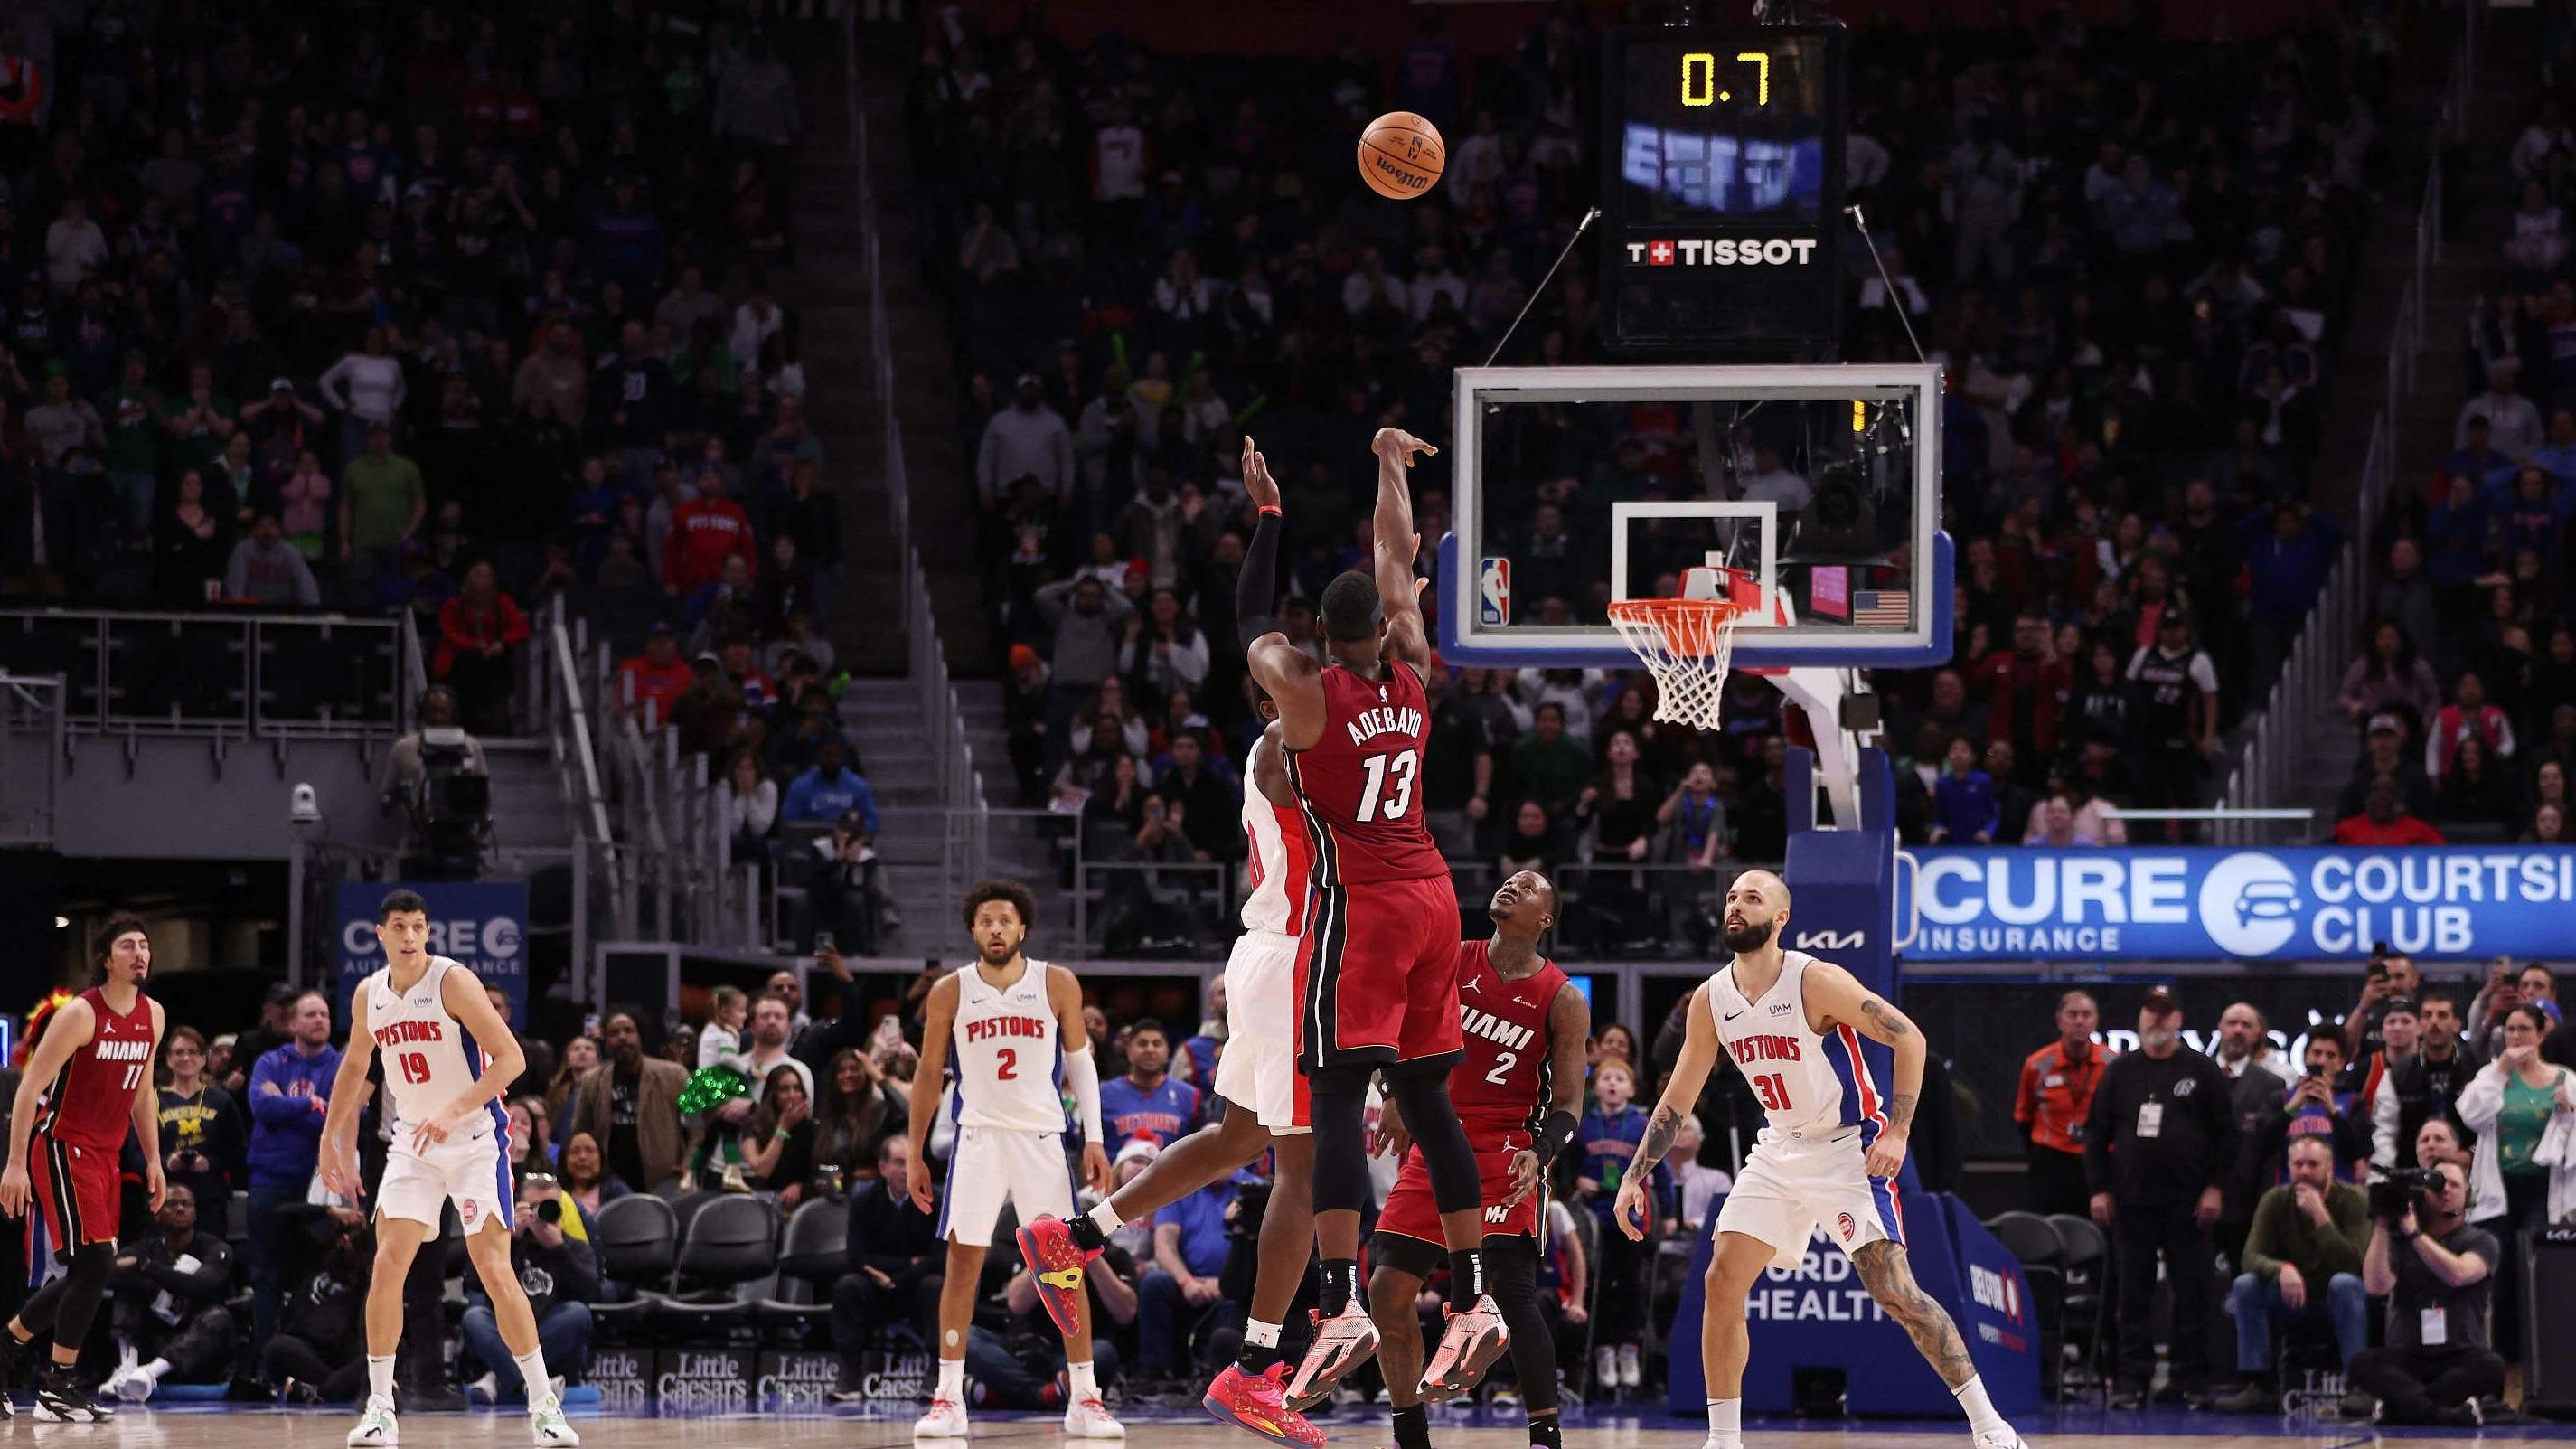 NBA: in video, the three-point basket at the buzzer of pivot Bam Adebayo against Detroit